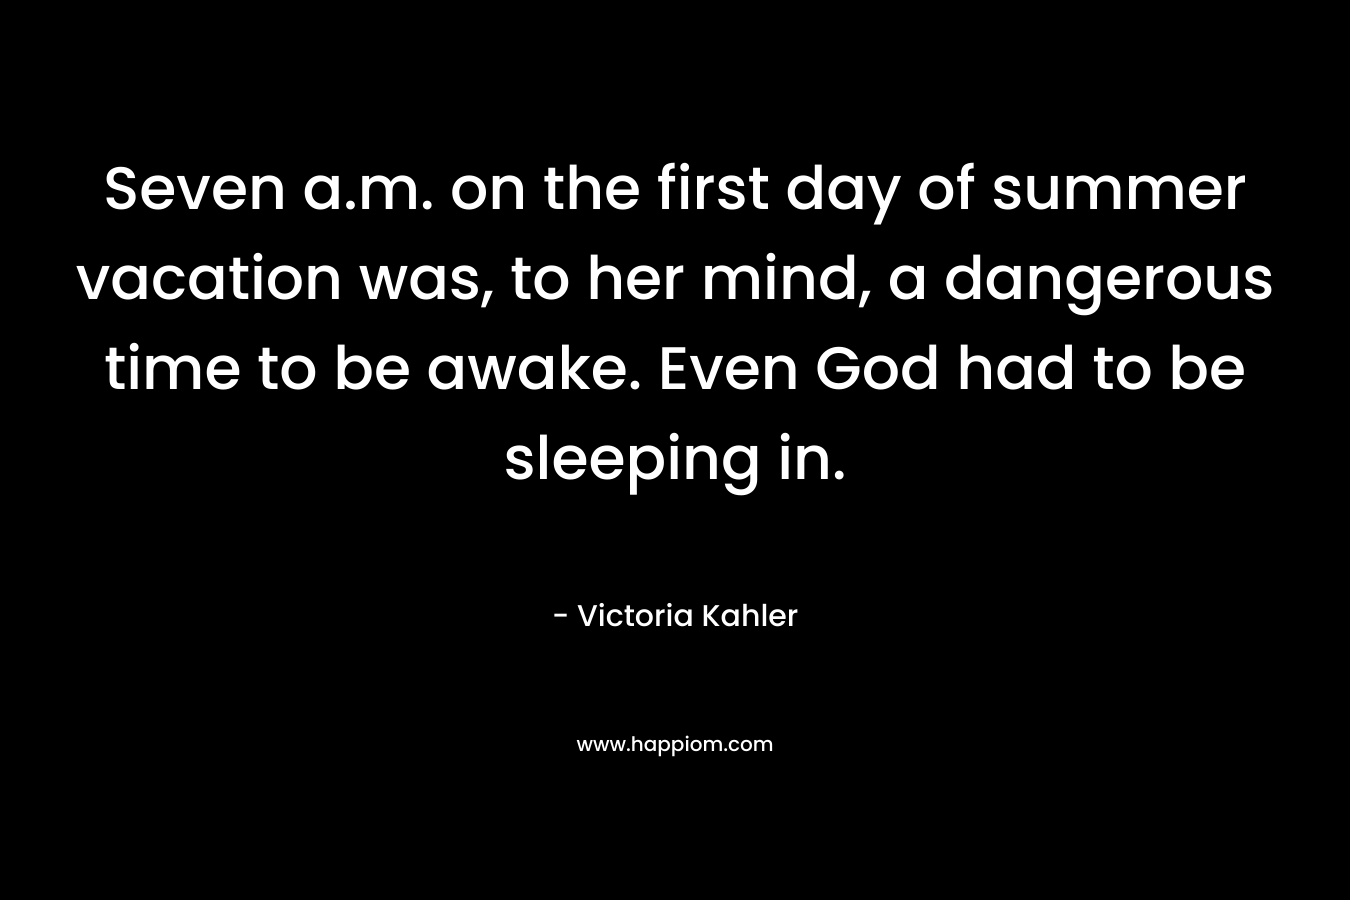 Seven a.m. on the first day of summer vacation was, to her mind, a dangerous time to be awake. Even God had to be sleeping in.